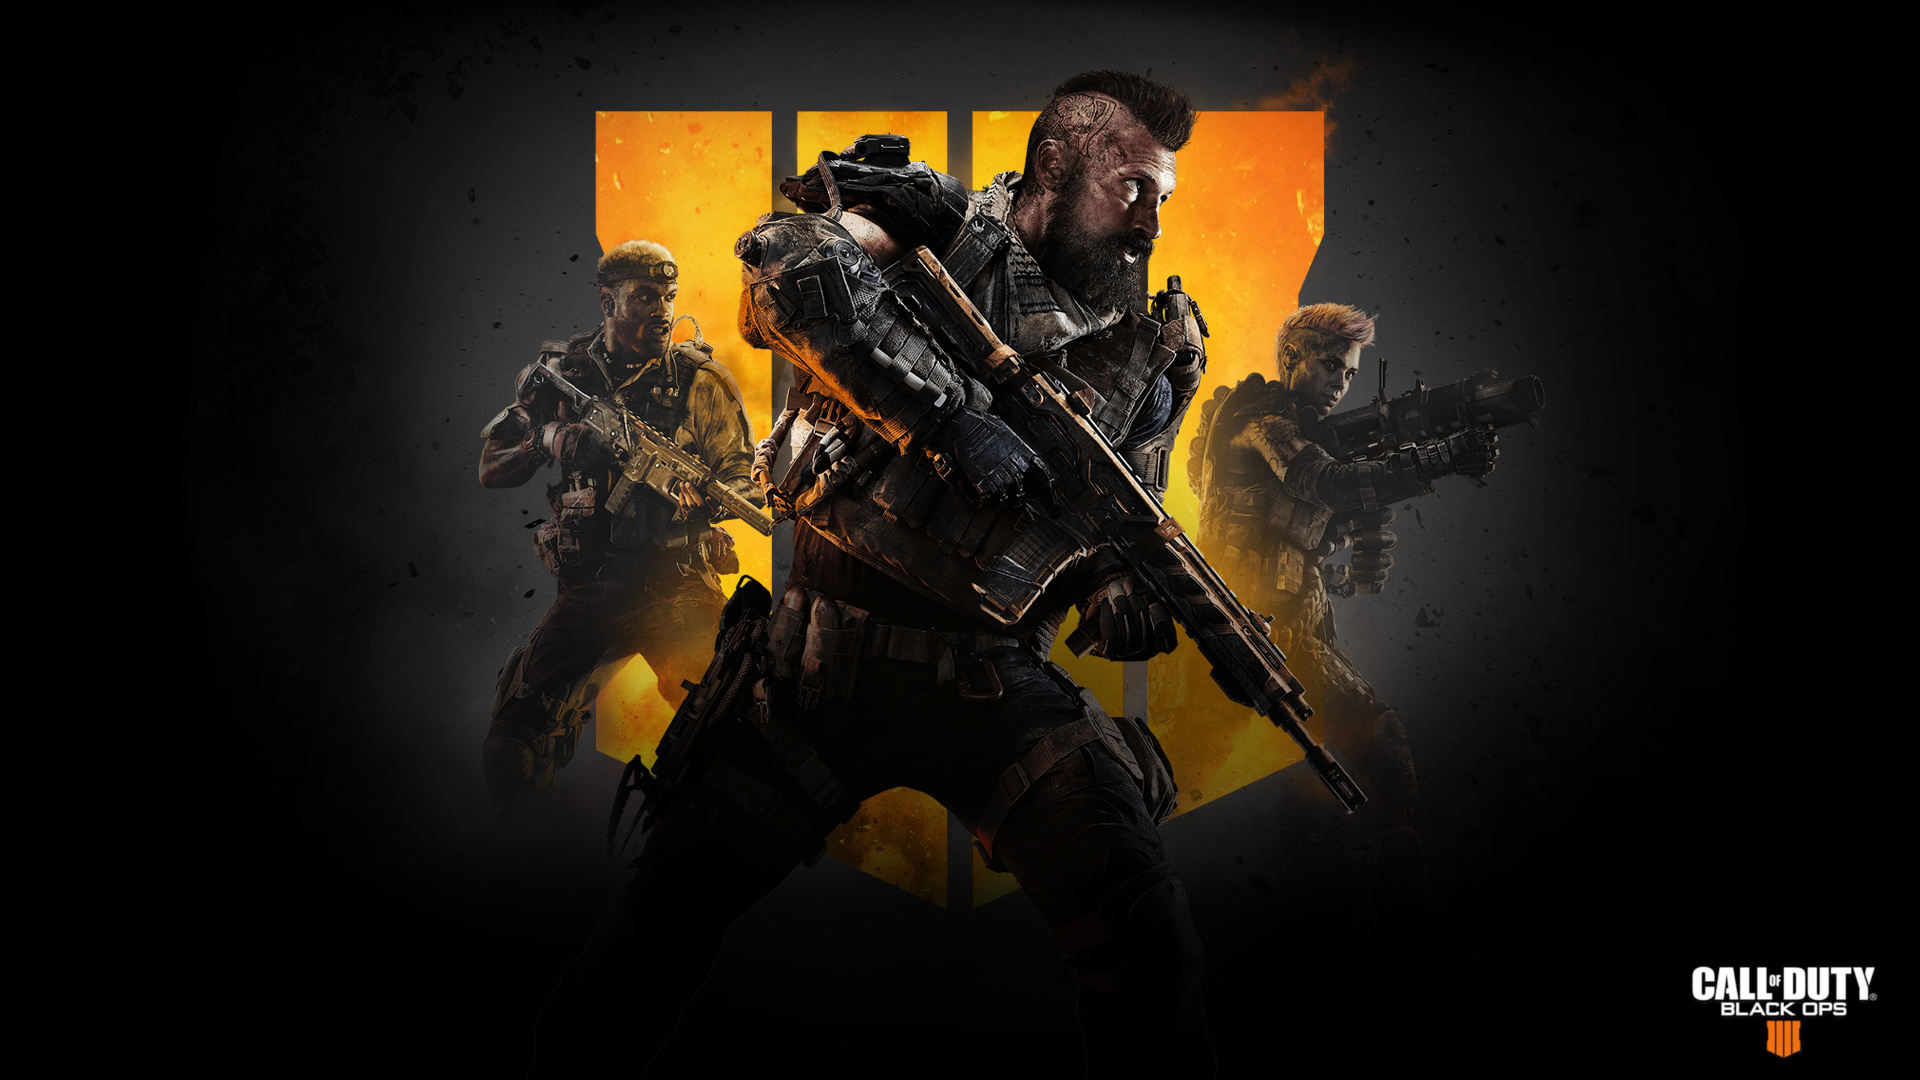 call of duty black ops 4 ppsspp download